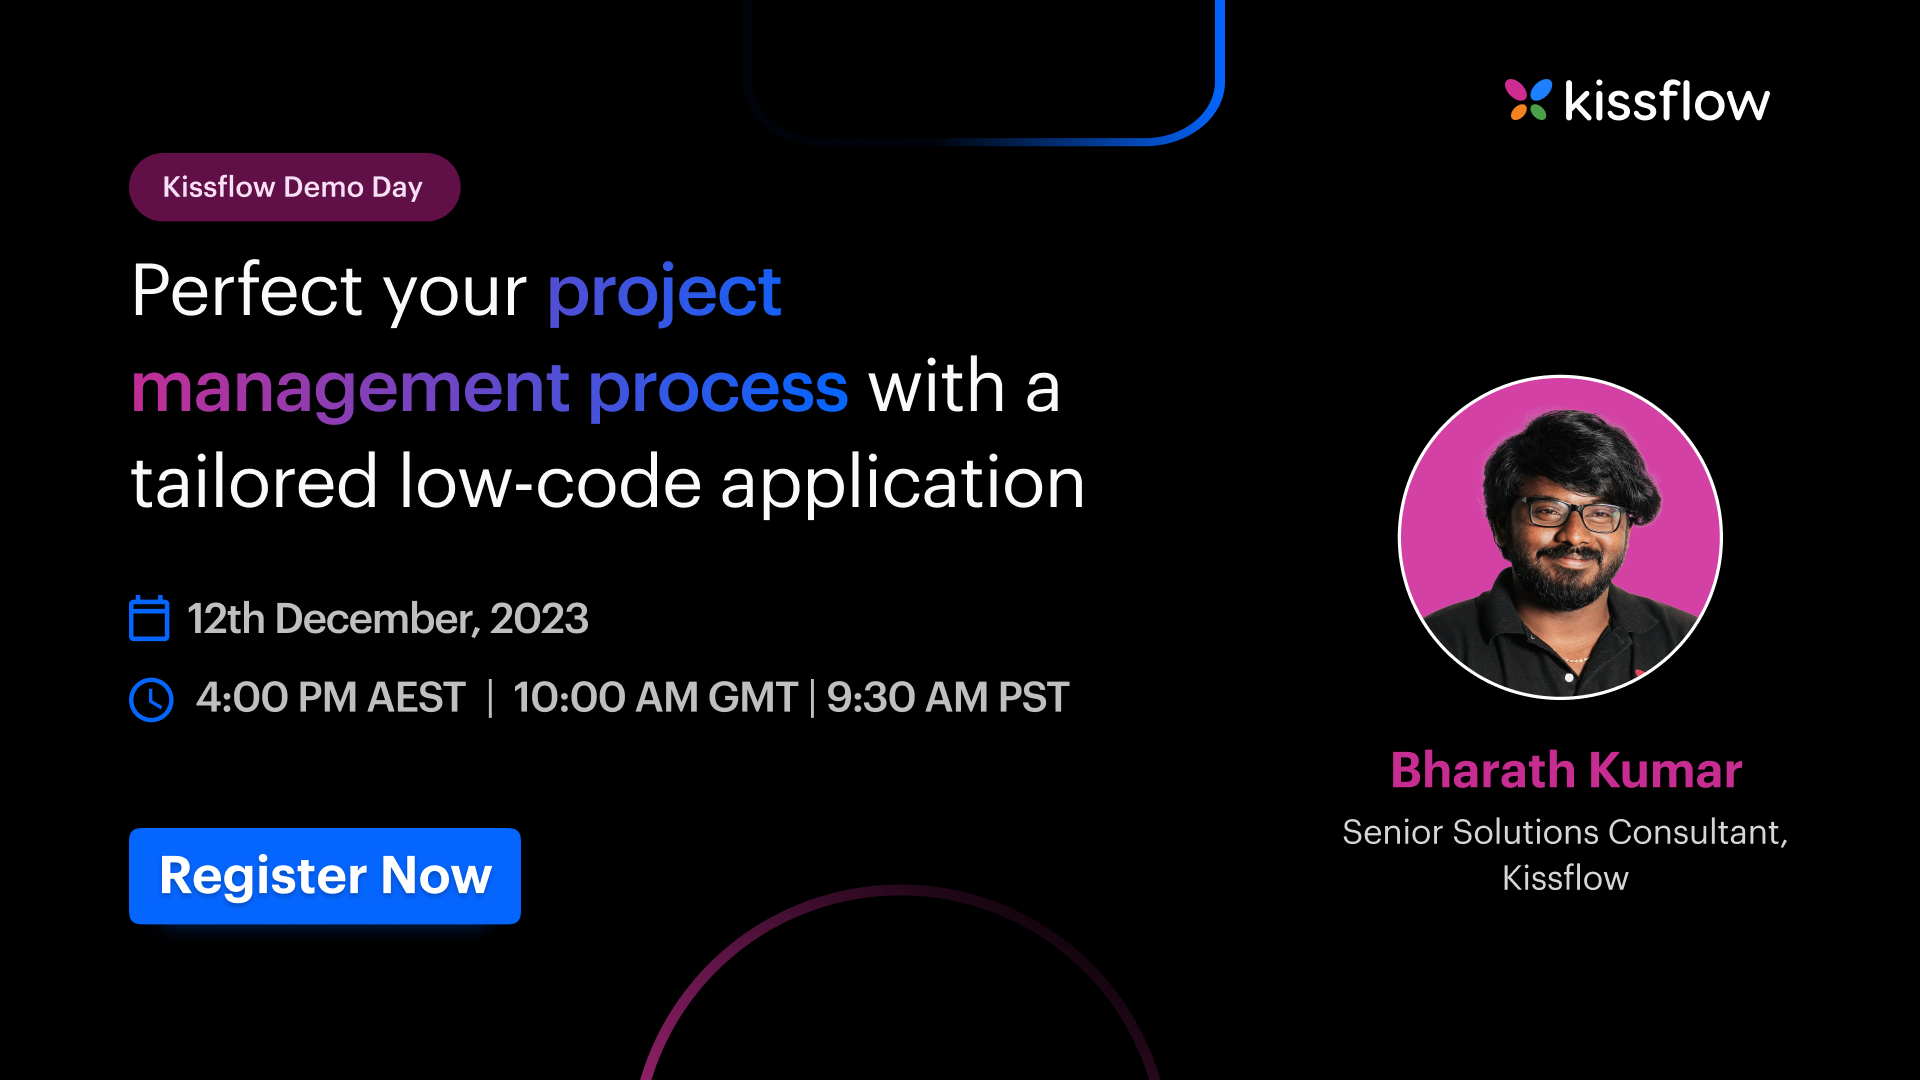 Perfect your project management process with a tailored low-code application 